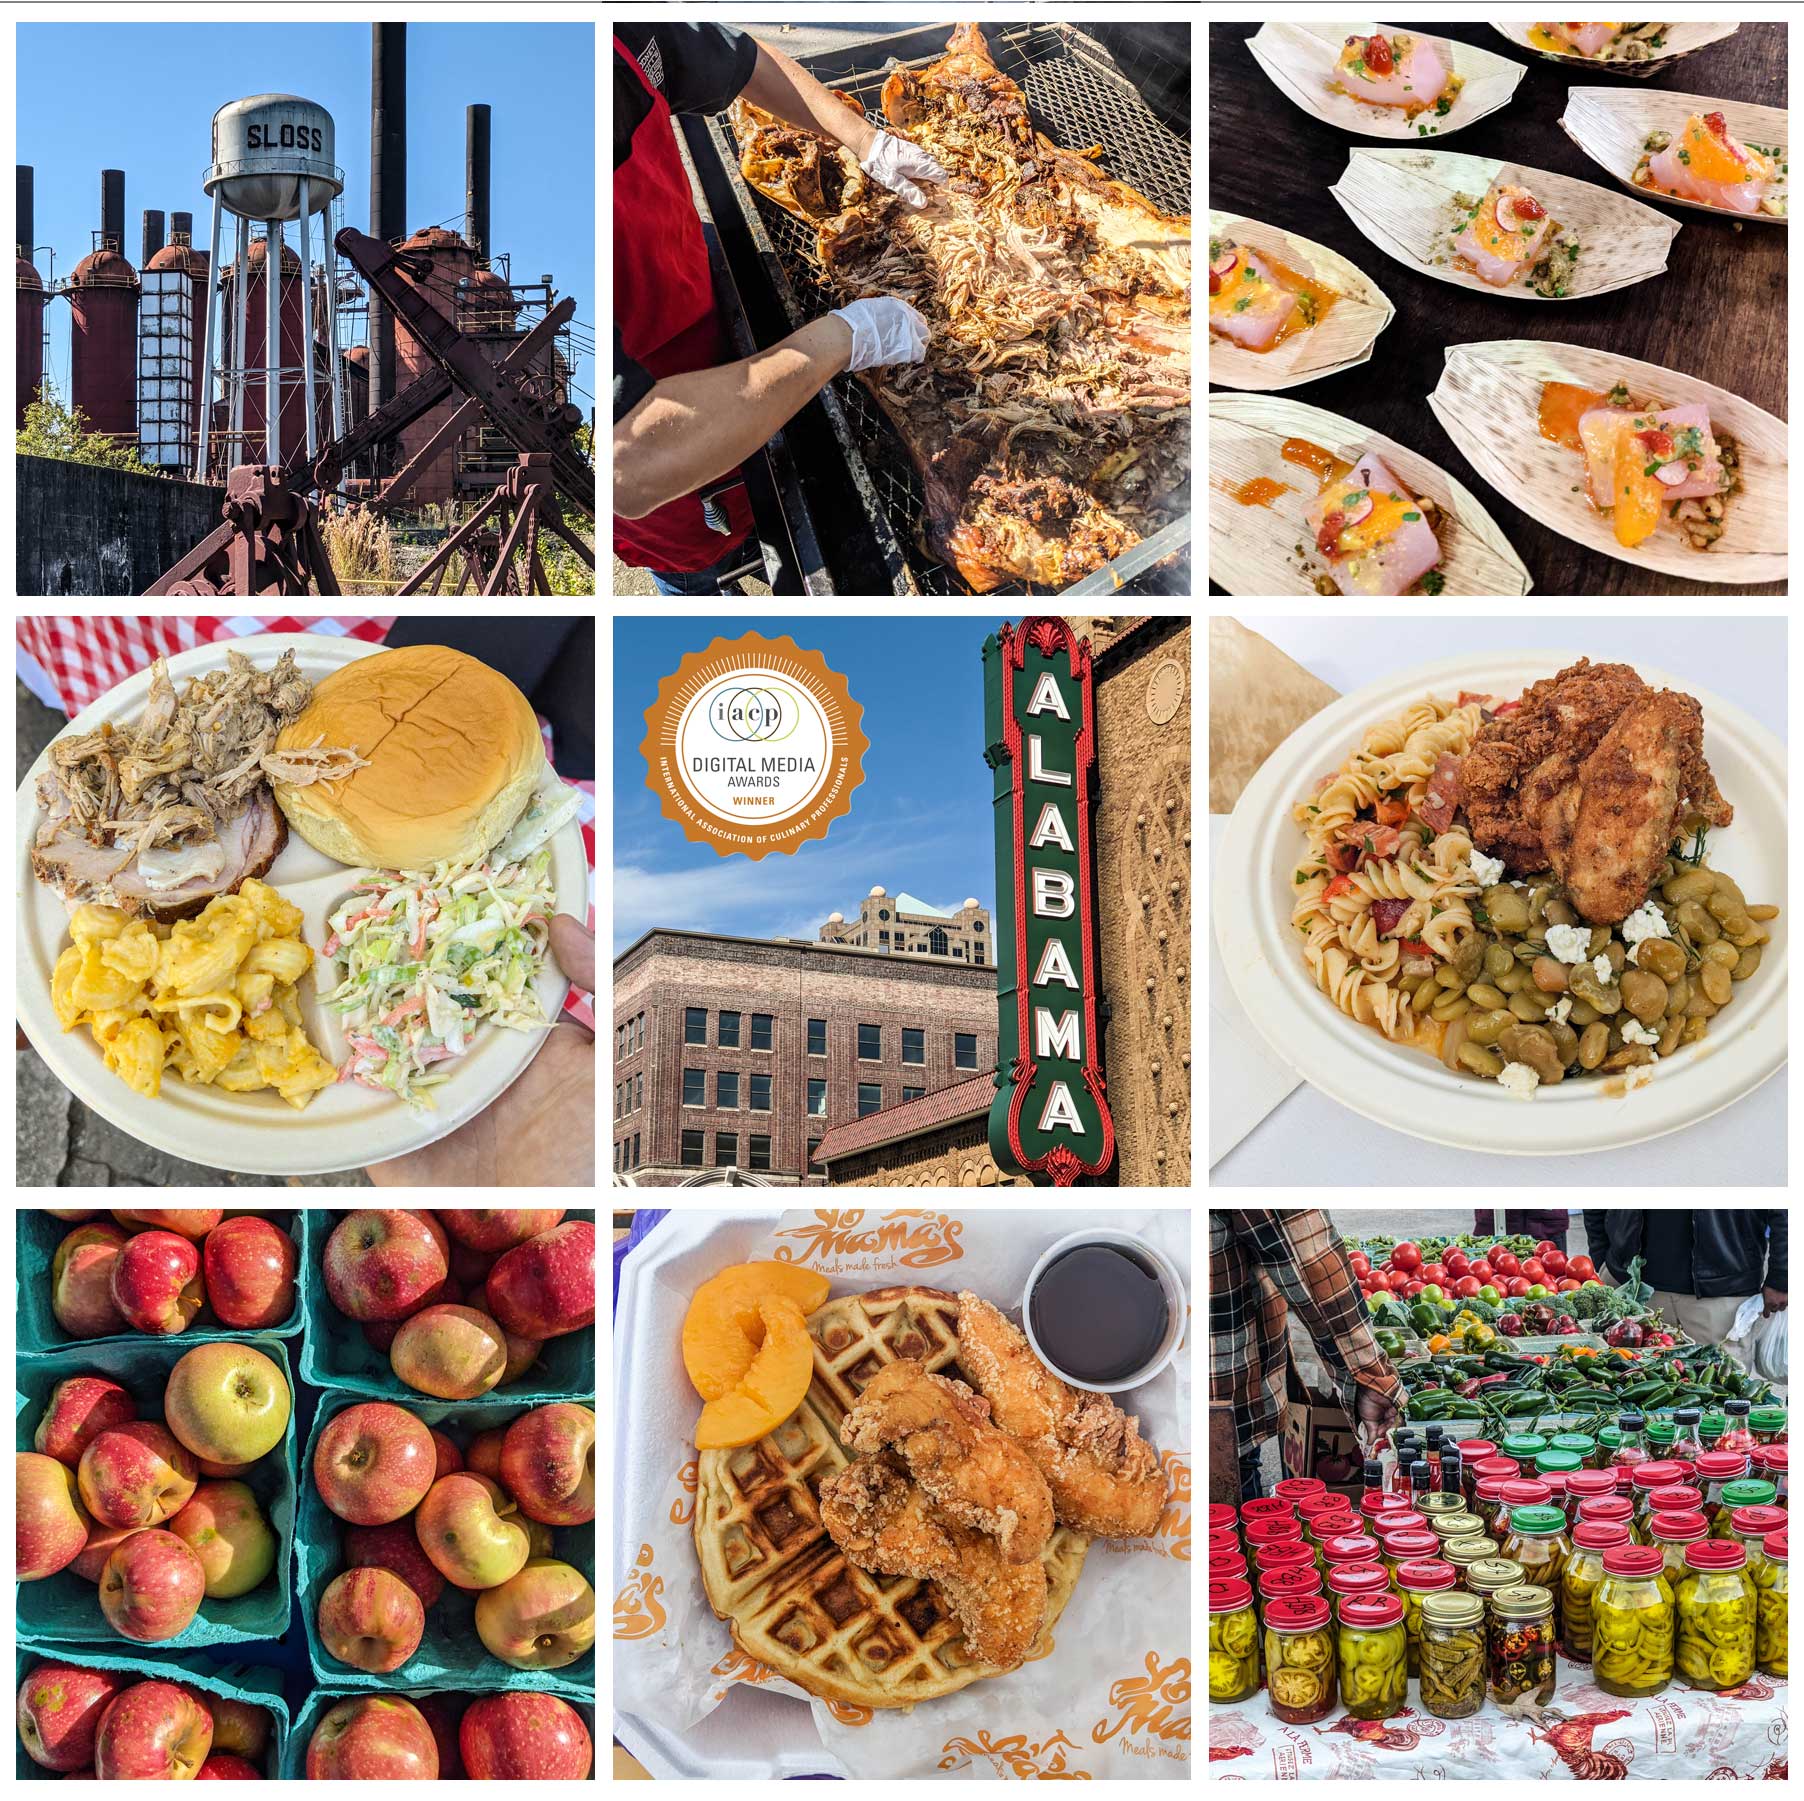 Compilation of images from the International Association of Culinary Professionals meeting and awards in Birmingham, Alabama